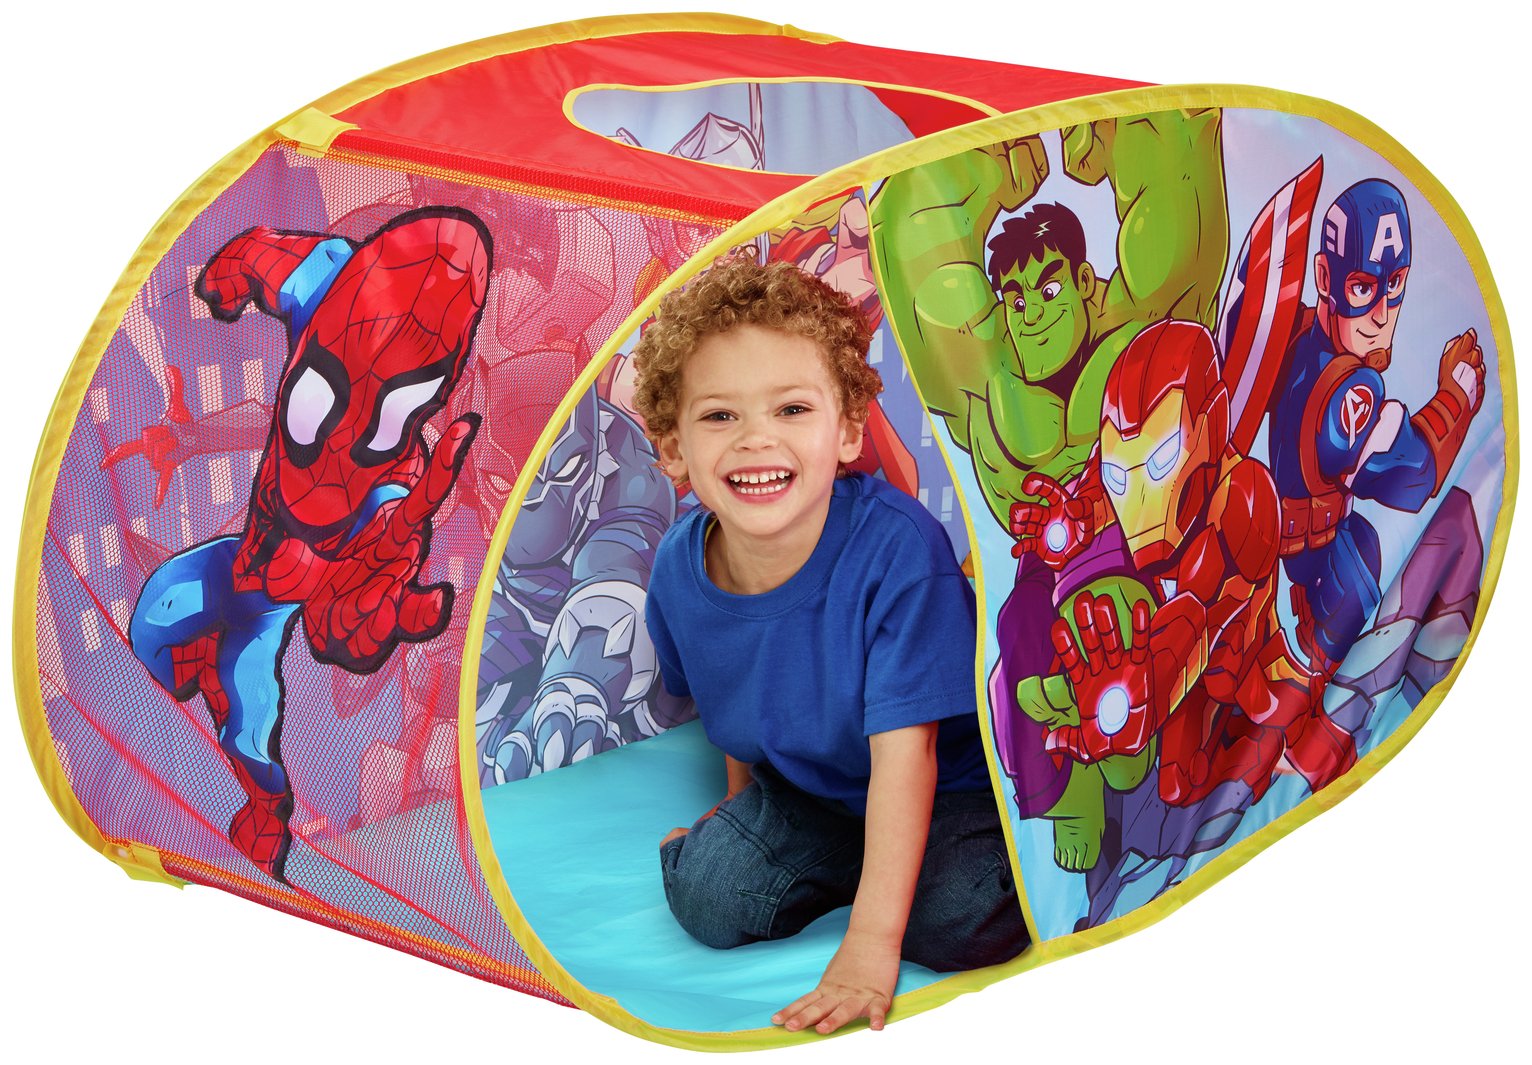 Marvel Superheroes Play Tent Review